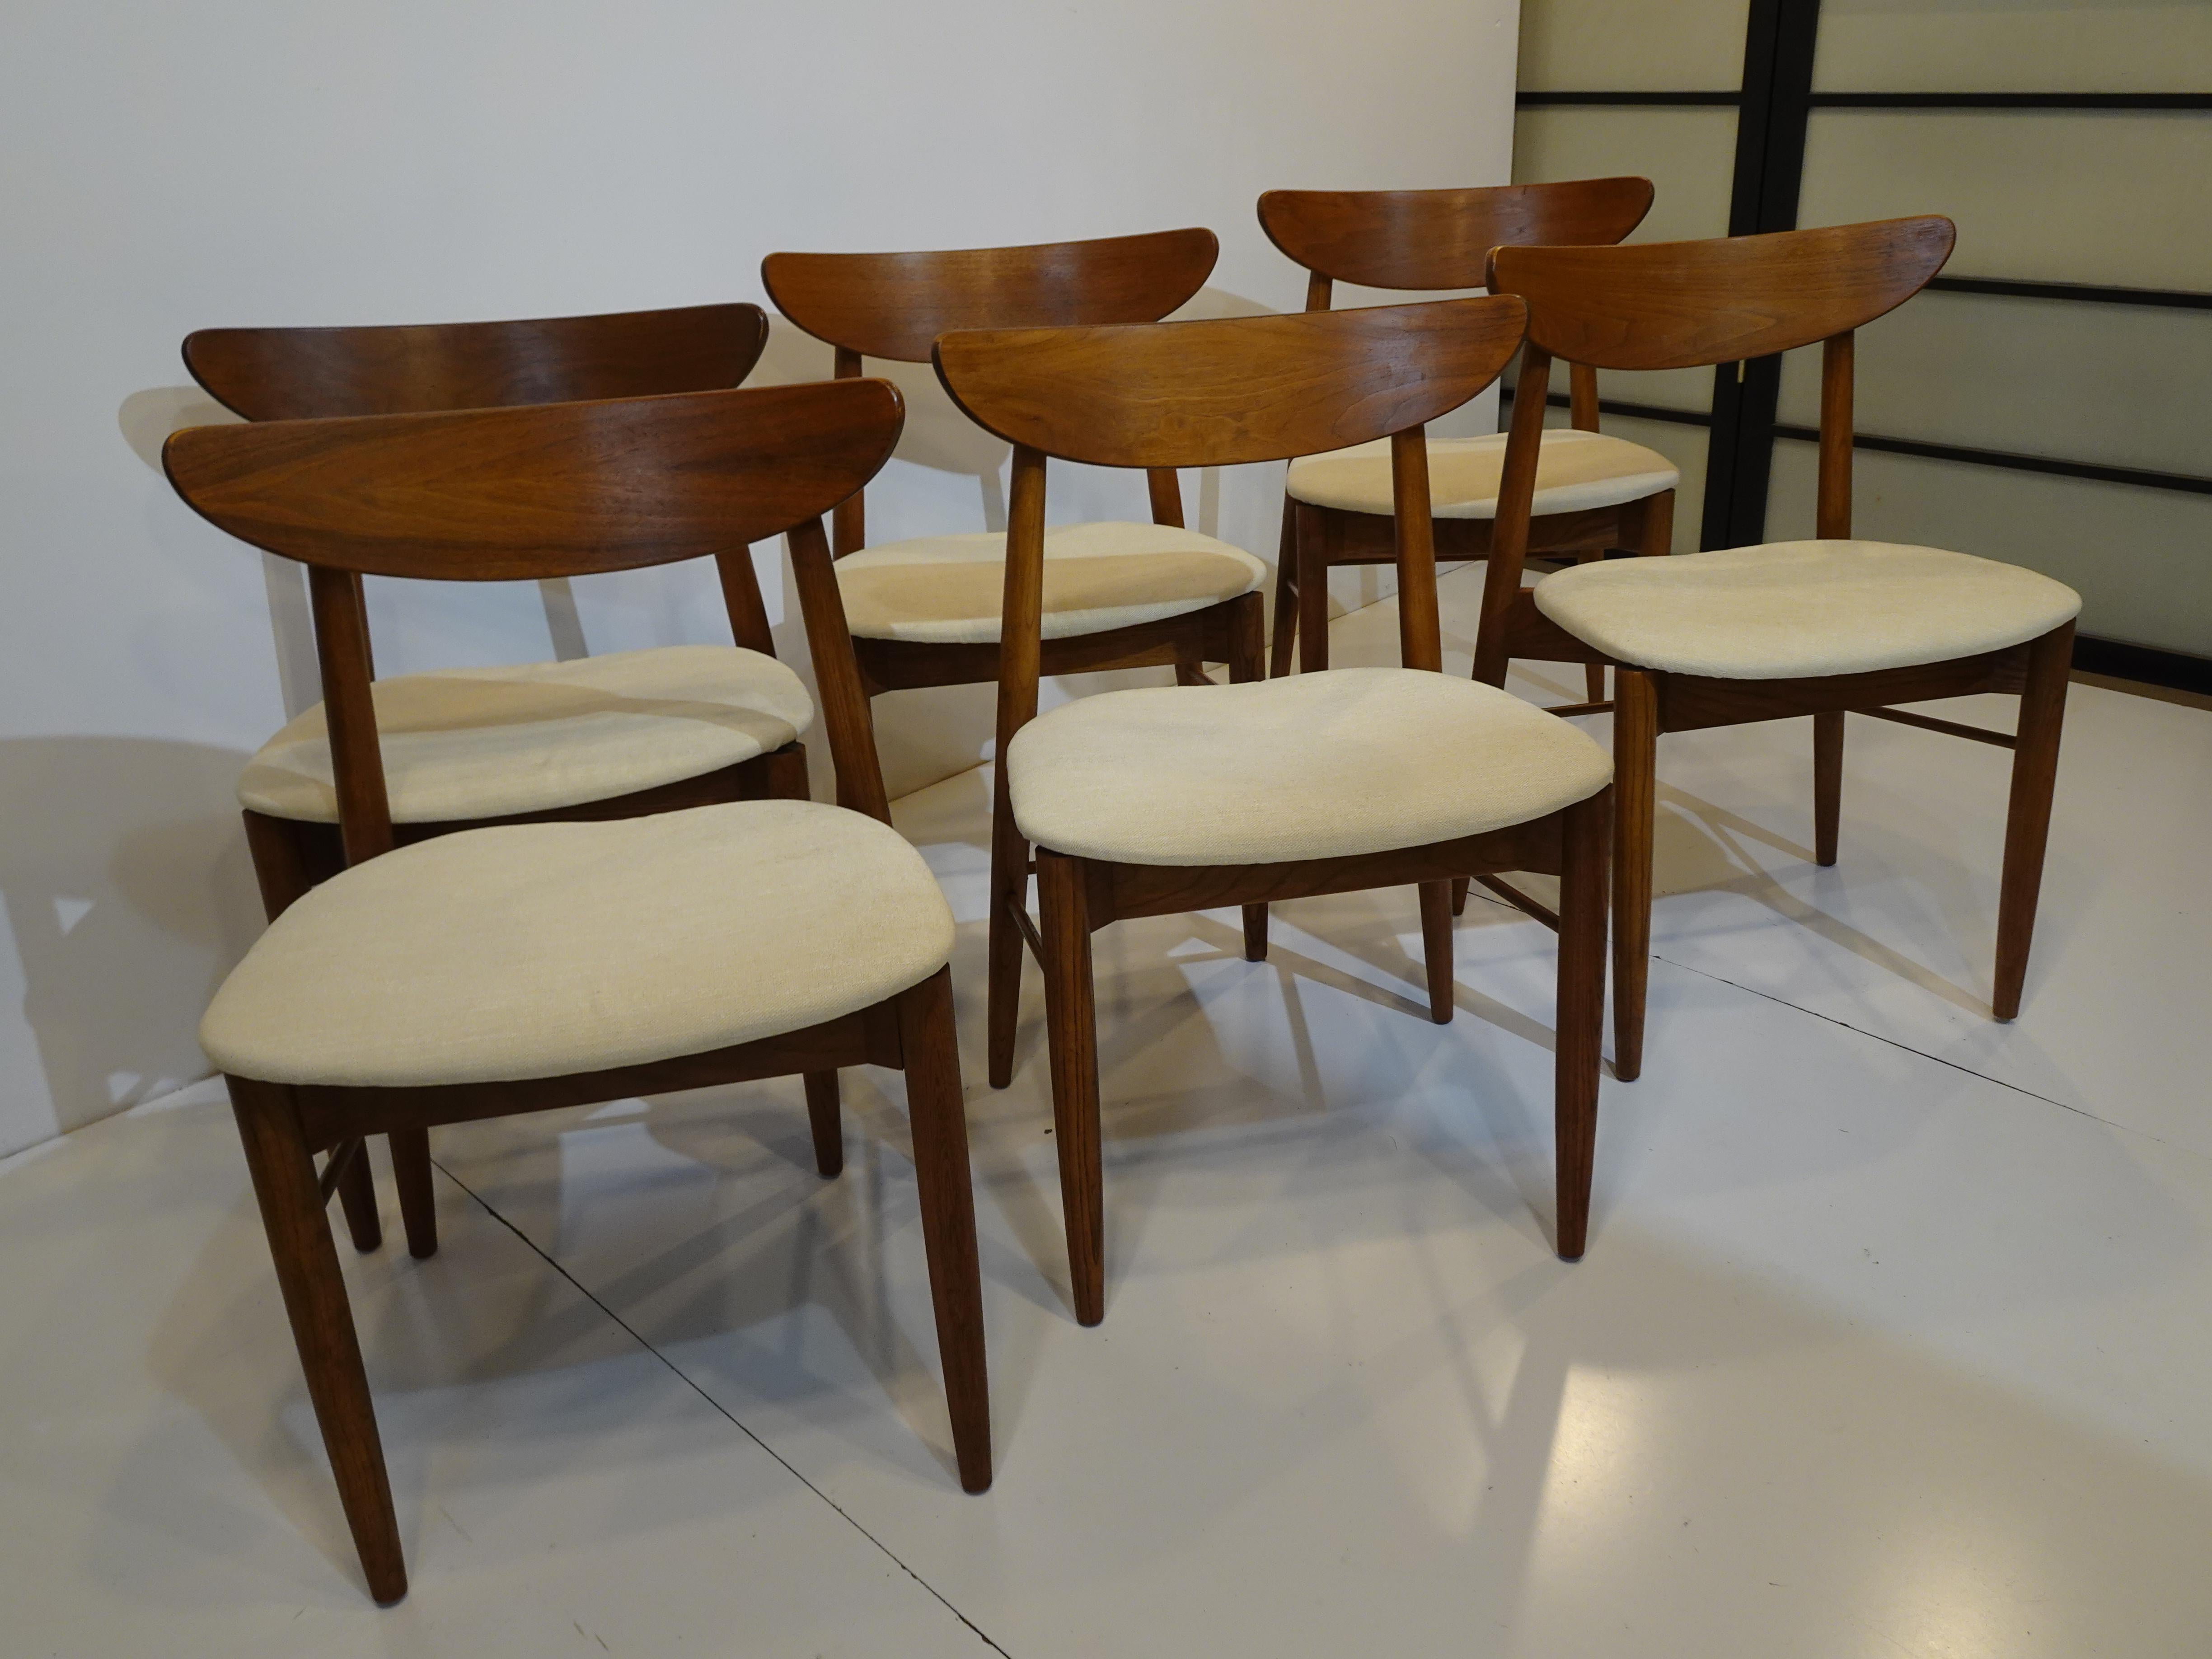 A set of six sculptural mid-century dining chairs in a medium walnut tone with cream linen contract fabric having a stylish curved backrest and X styled bracing with lower stretcher dowels. Designed by Paul Browning for the Stanley Furniture company